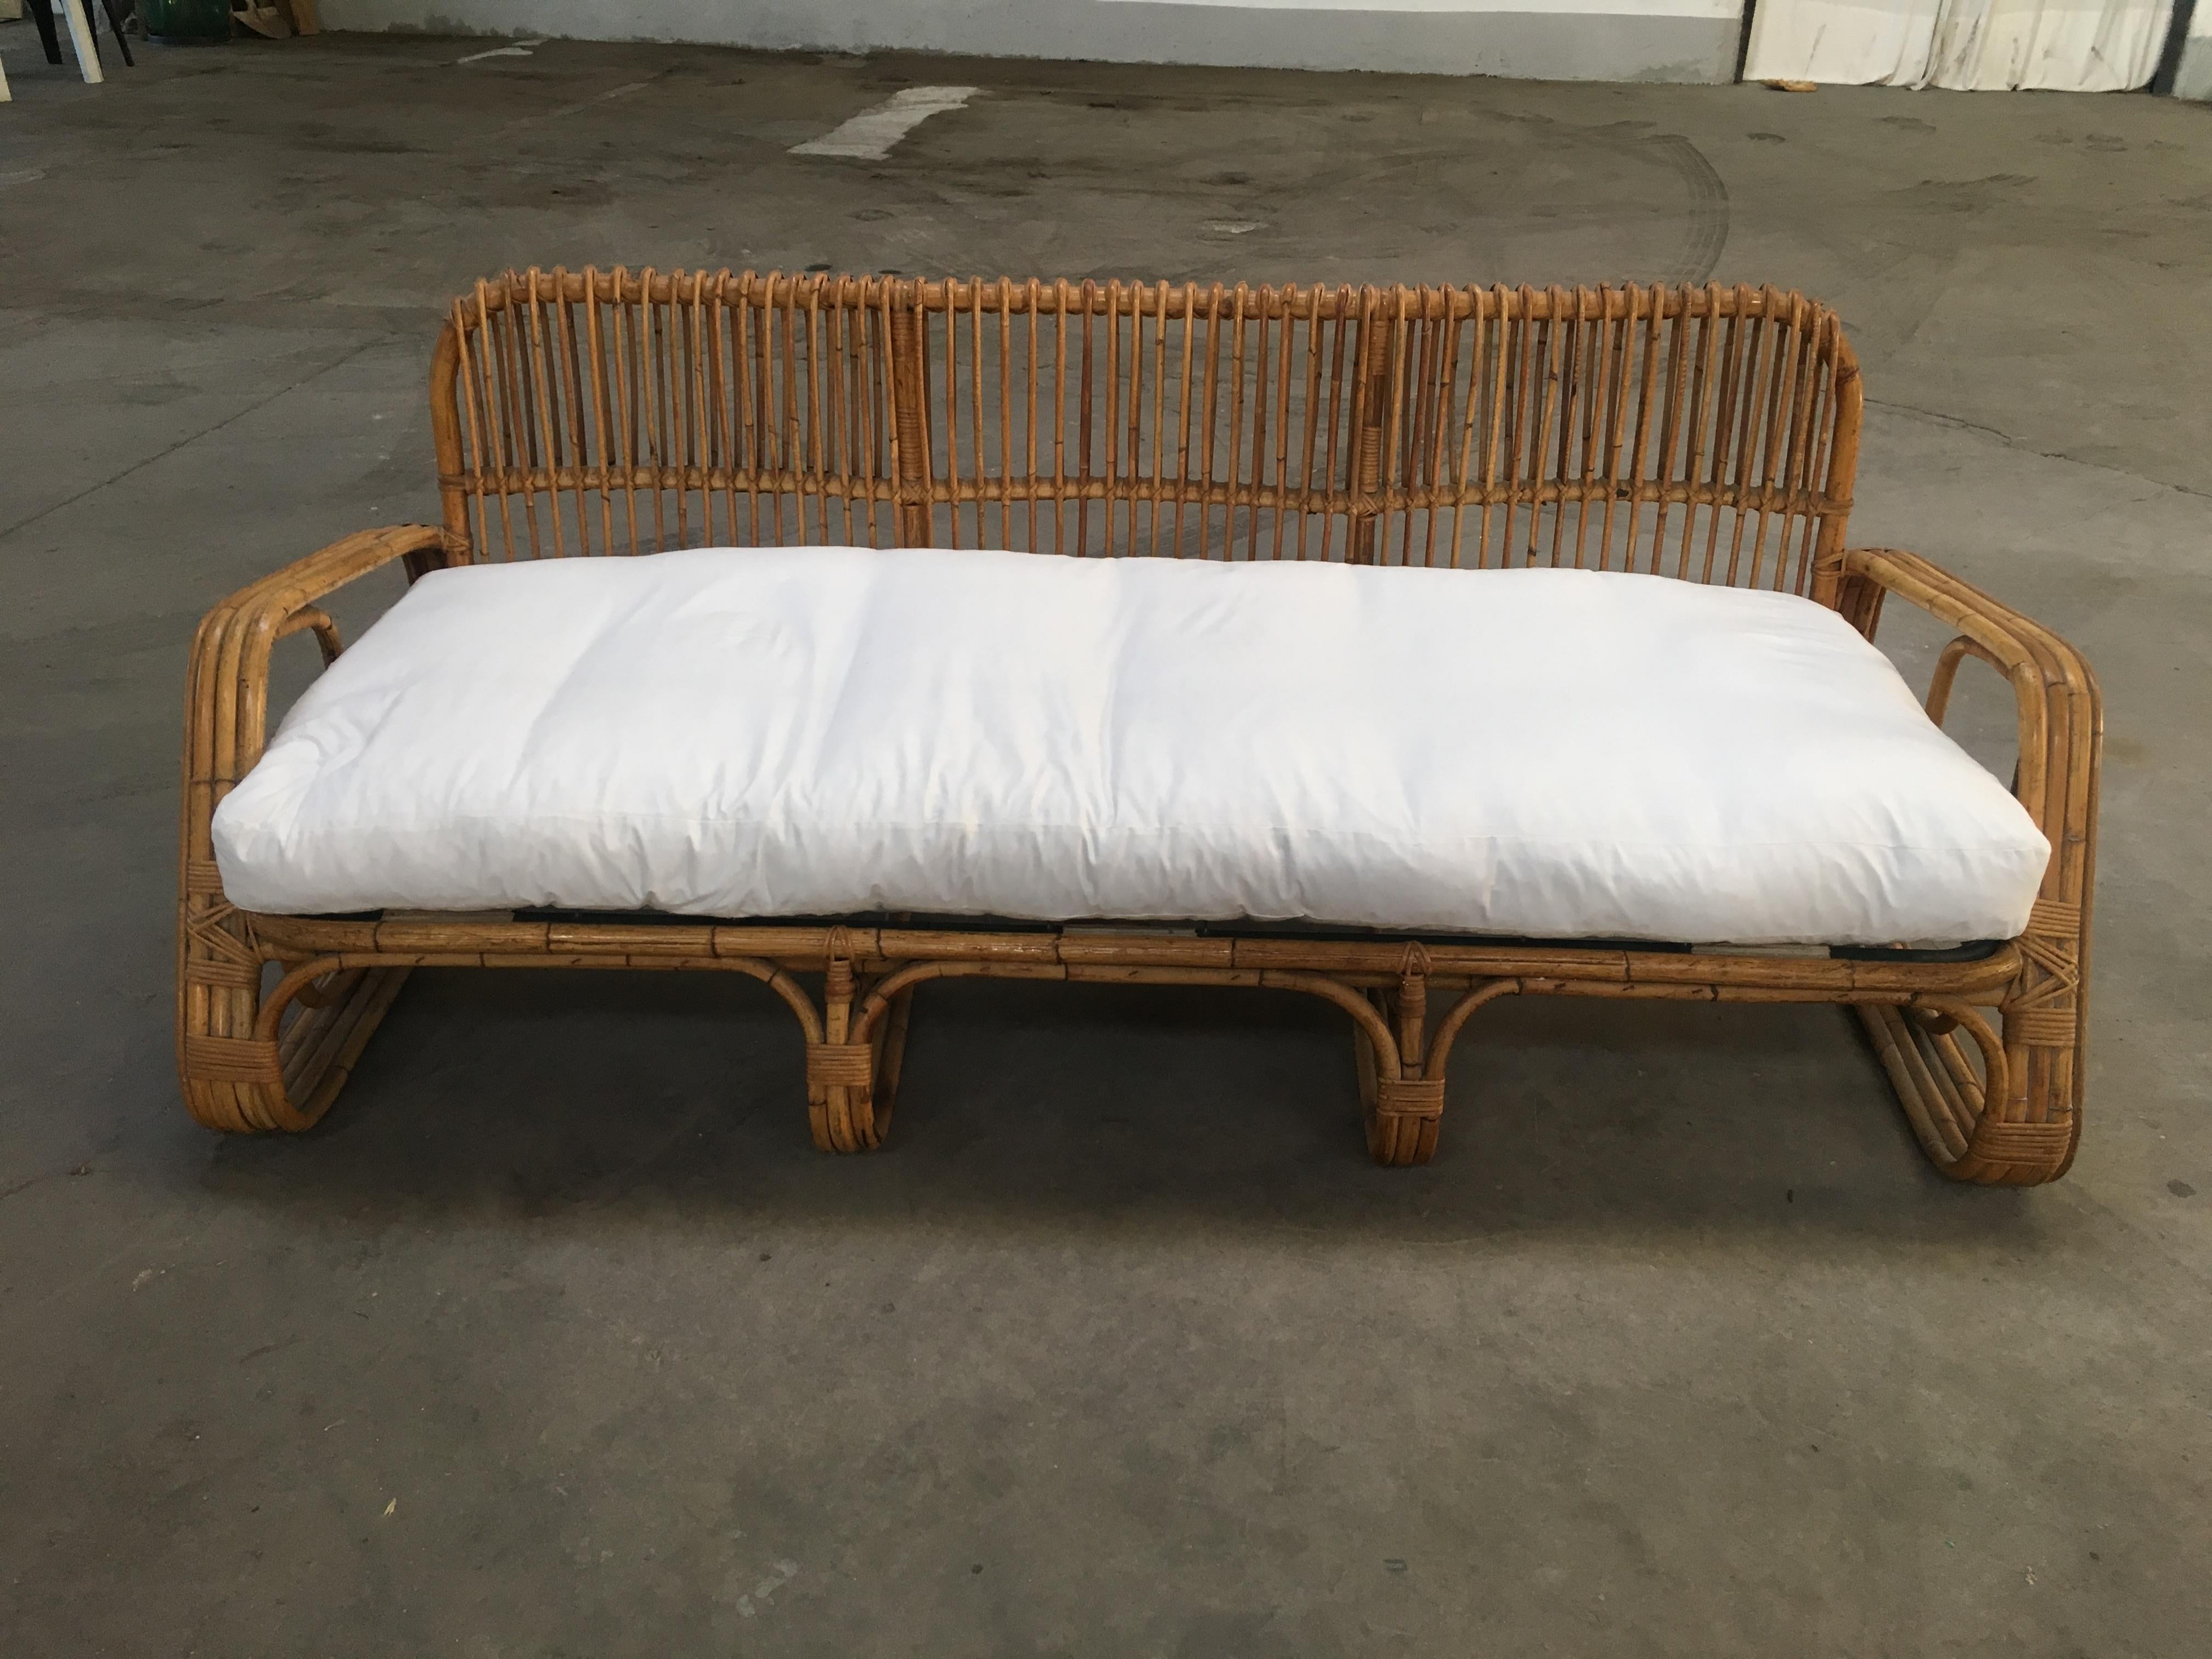 Mid-Century Modern Italian three-seat bamboo sofa, 1960s.
The cushion has been made brand new on size for this sofa.